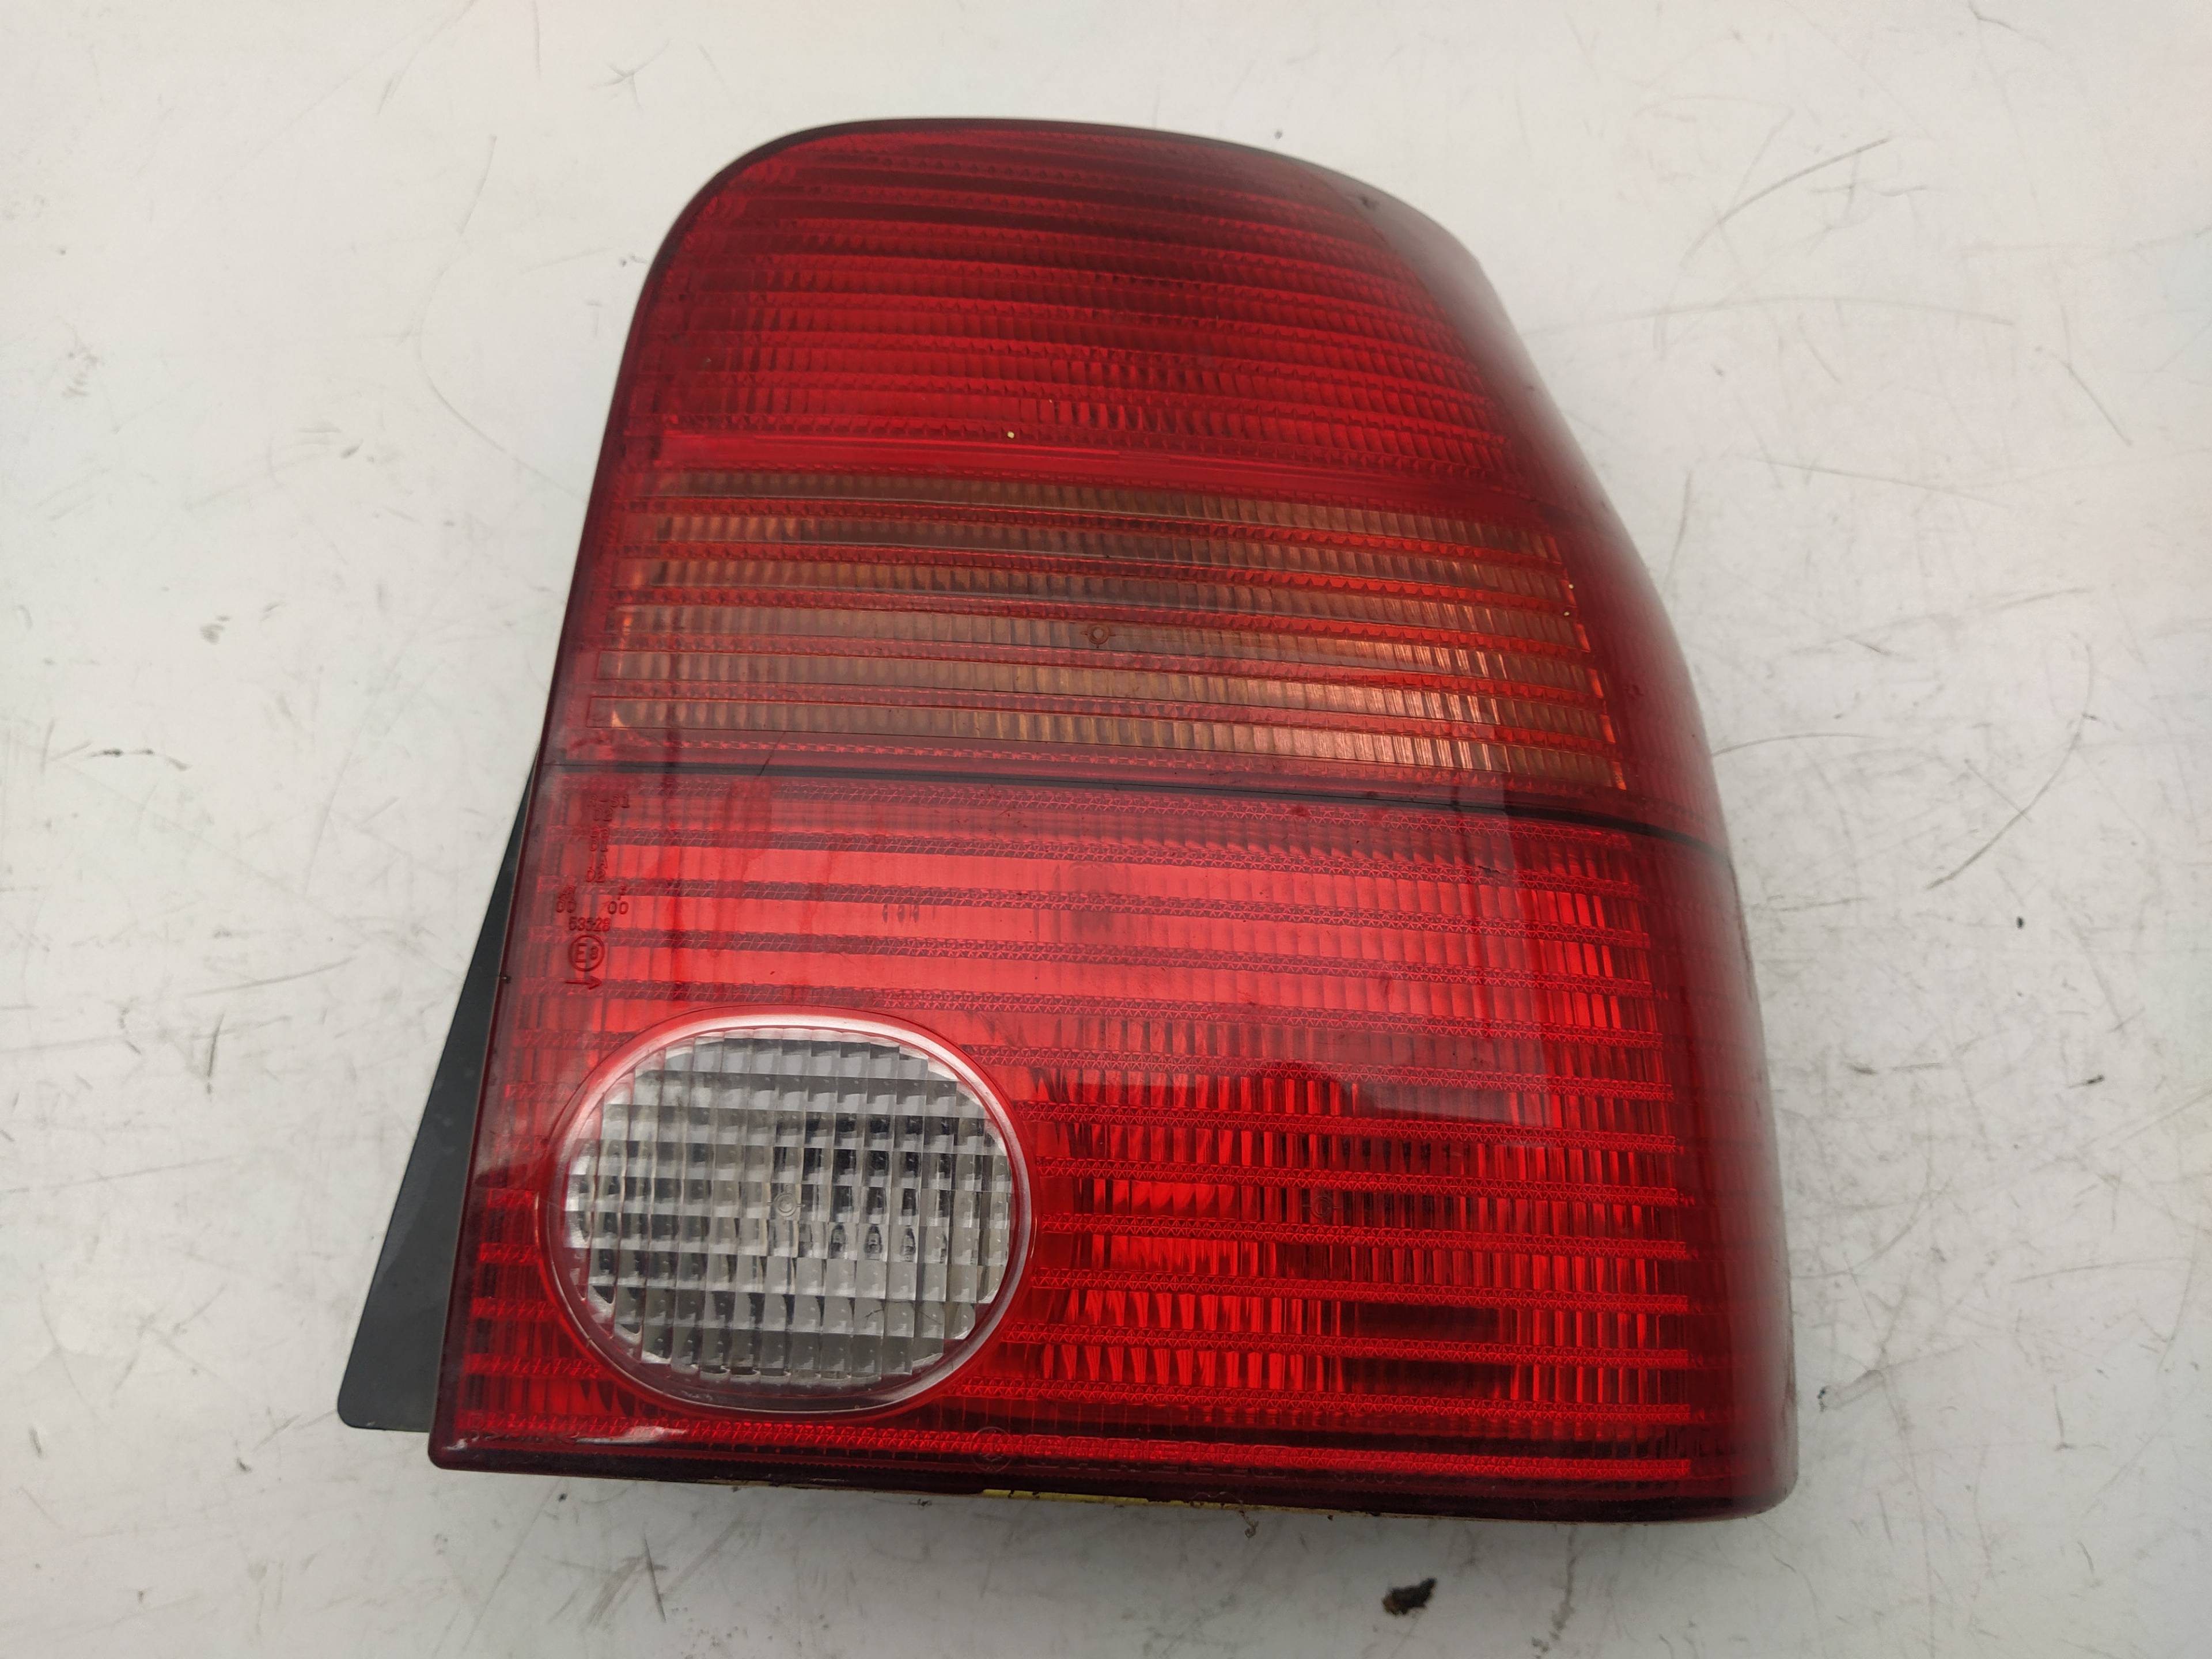 VOLKSWAGEN Lupo 6X (1998-2005) Rear Right Taillight Lamp 38020748 18630048